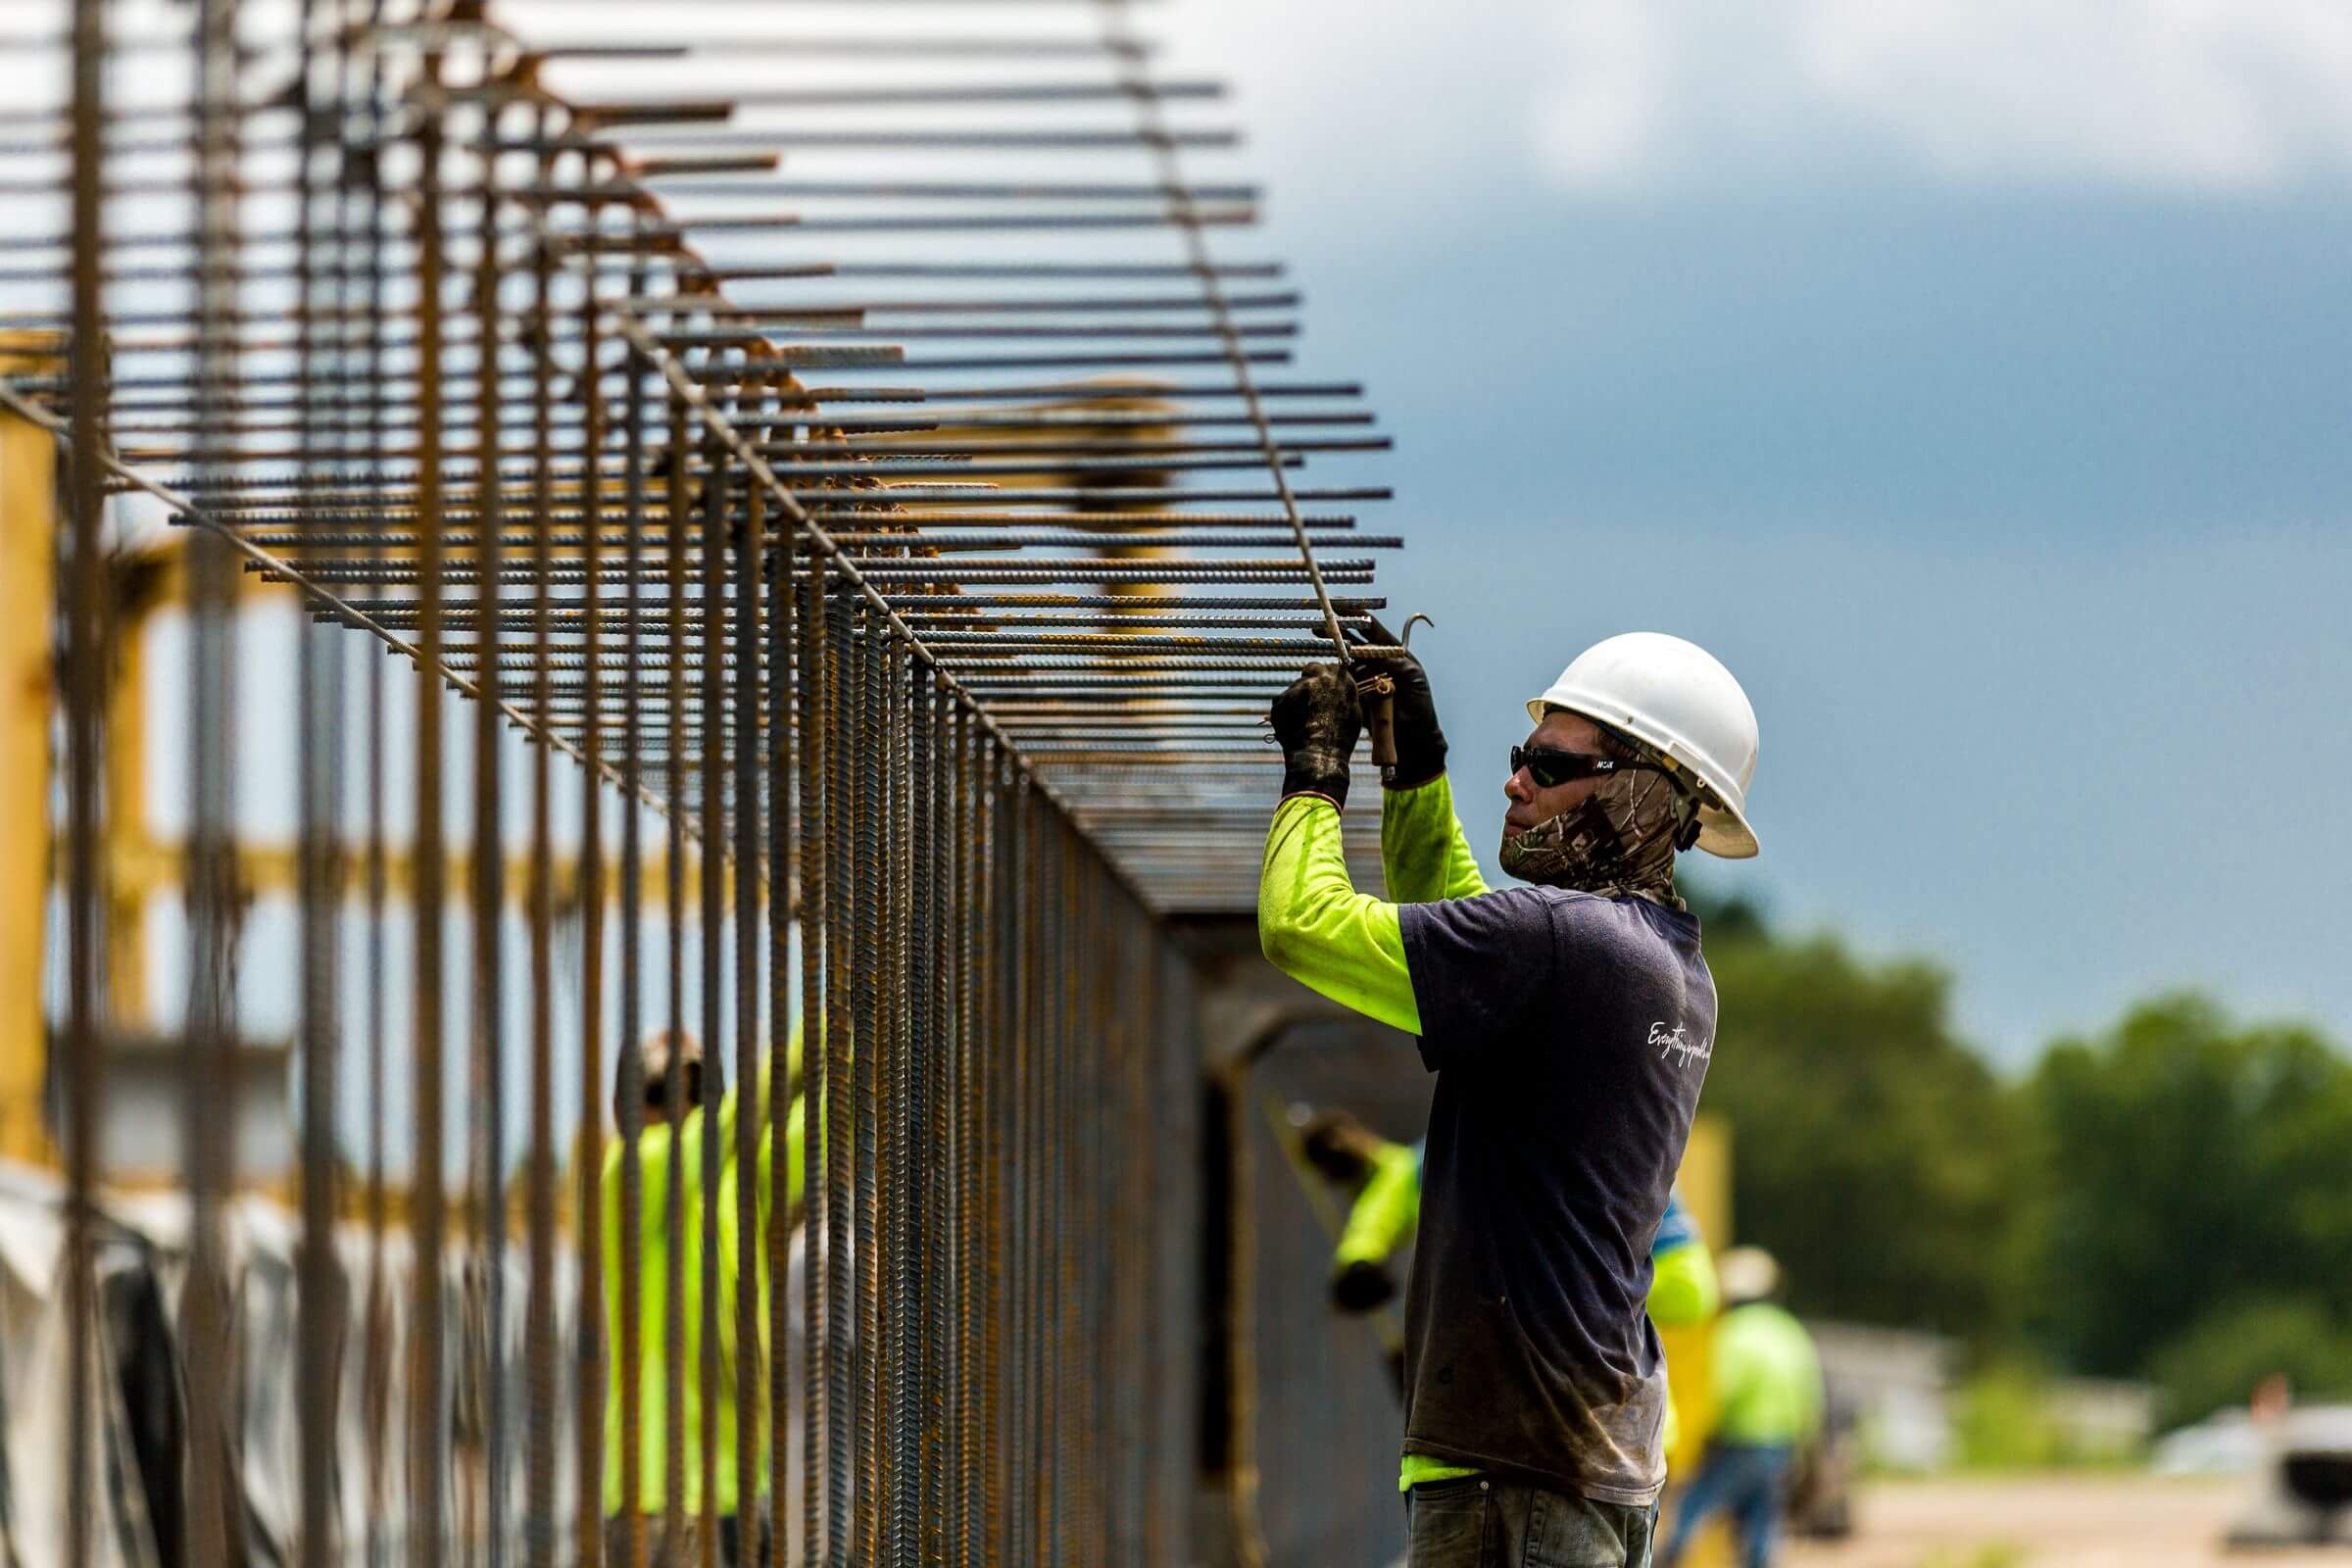 A man in a construction worker uniform fixes a fence.